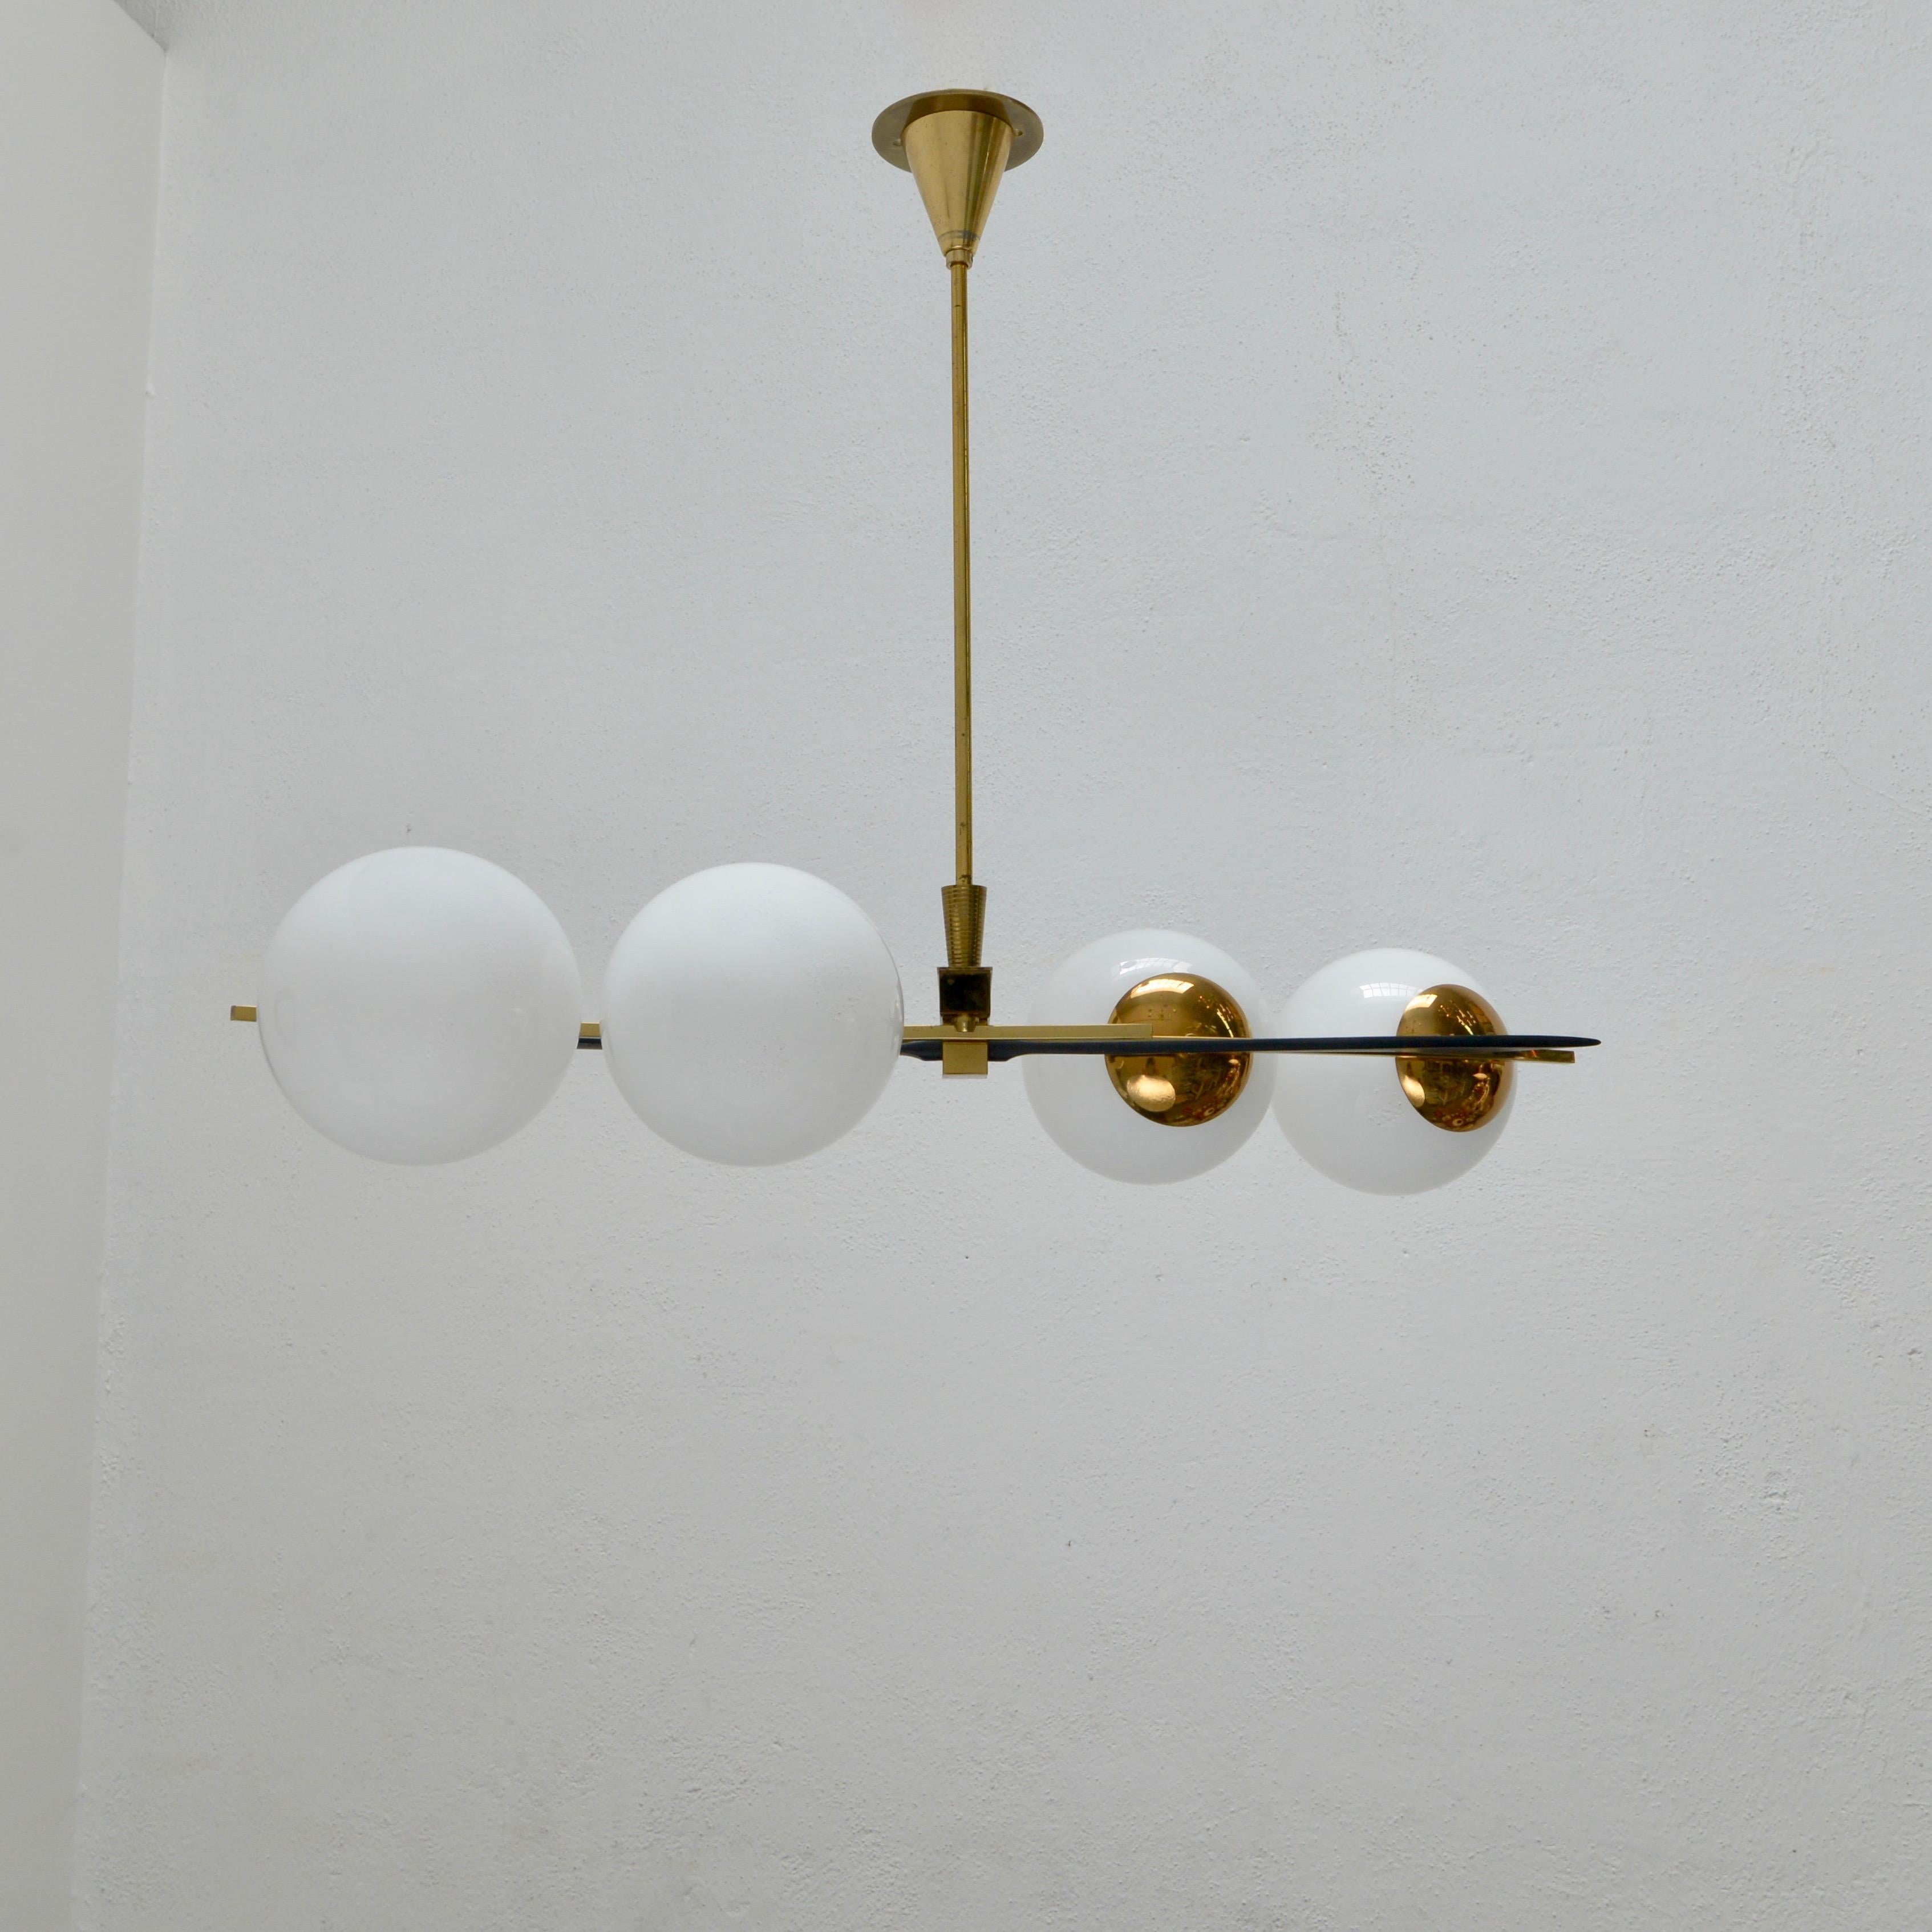 Beautiful 4 globe classical midcentury 1950s French glass, aluminum and naturally aged large brass chandelier by Lunel. With 4-E12 candelabrum based sockets (1) per shade. Wired for use in the US. Light bulbs included with order.
Measurements:
OAD